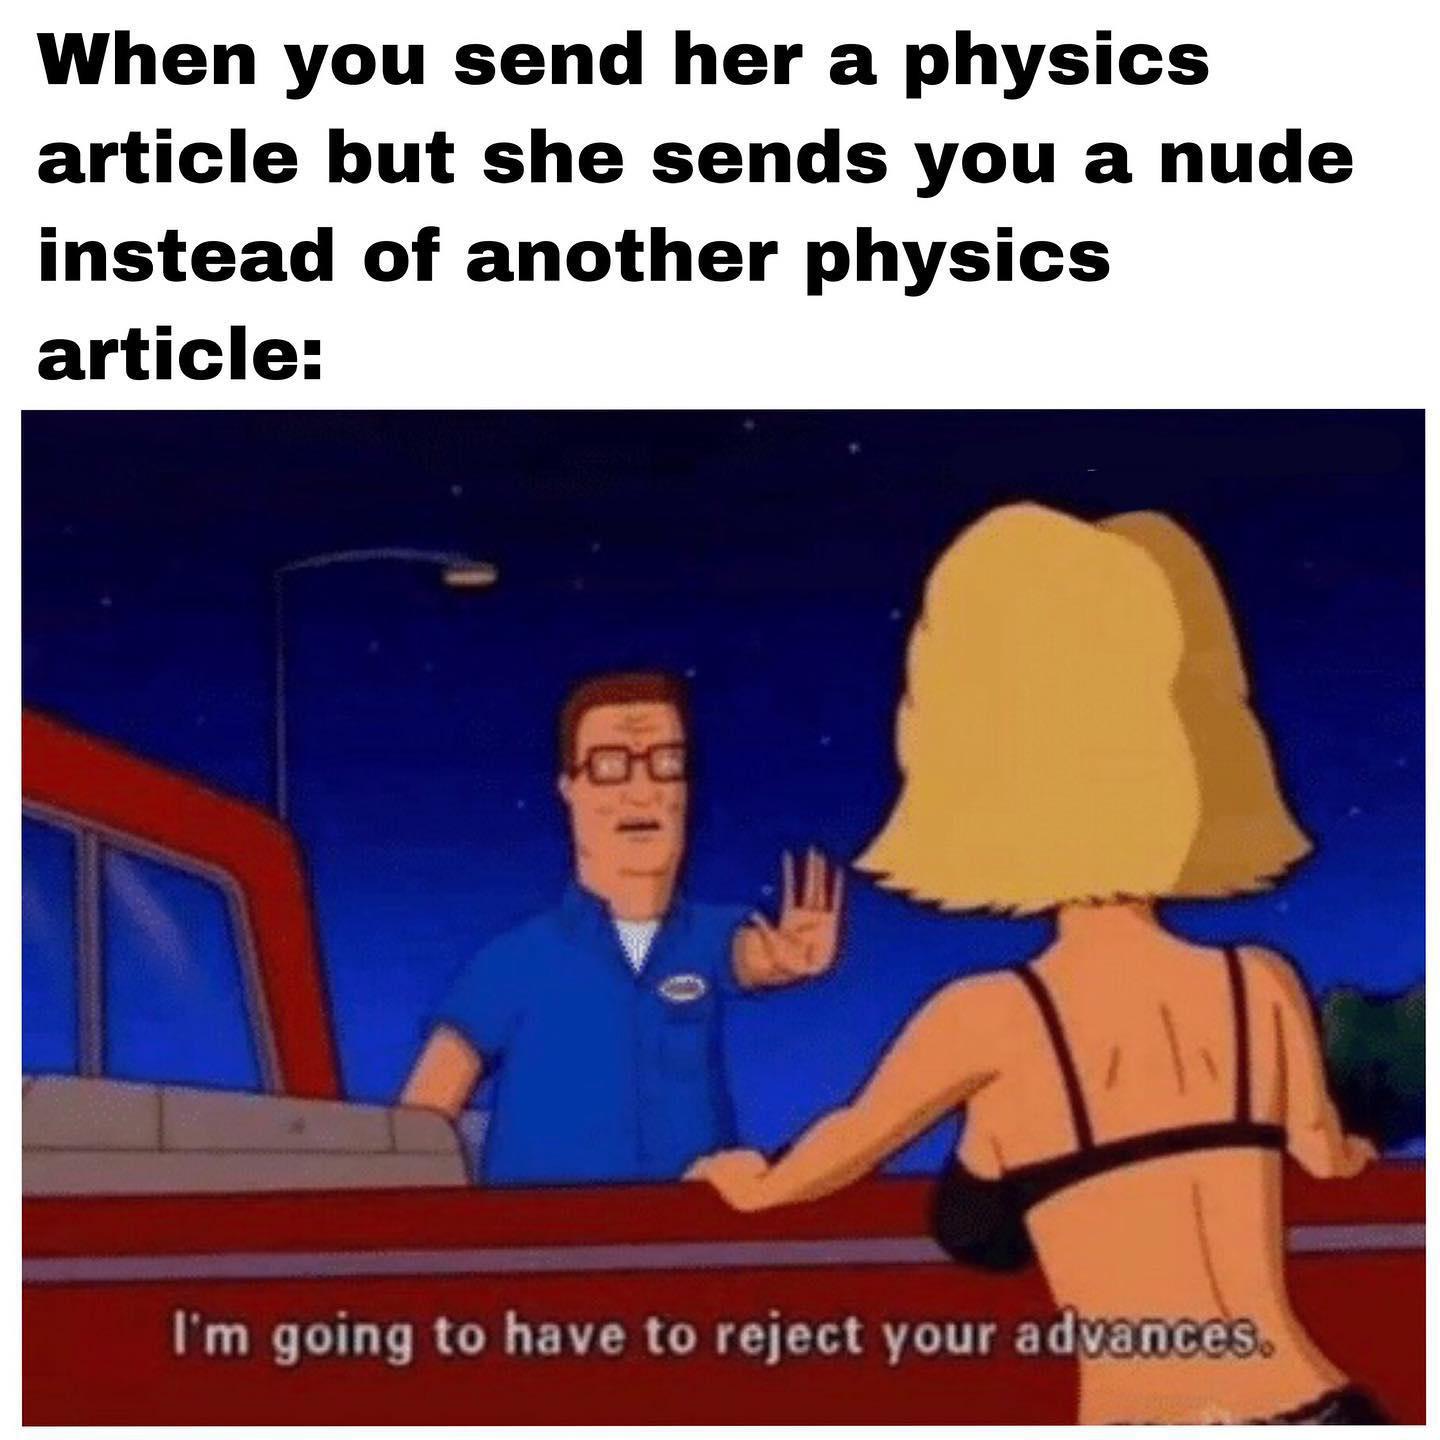 dank memes - funny memes - she's perfect meme - When you send her a physics article but she sends you a nude instead of another physics article I'm going to have to reject your advances.